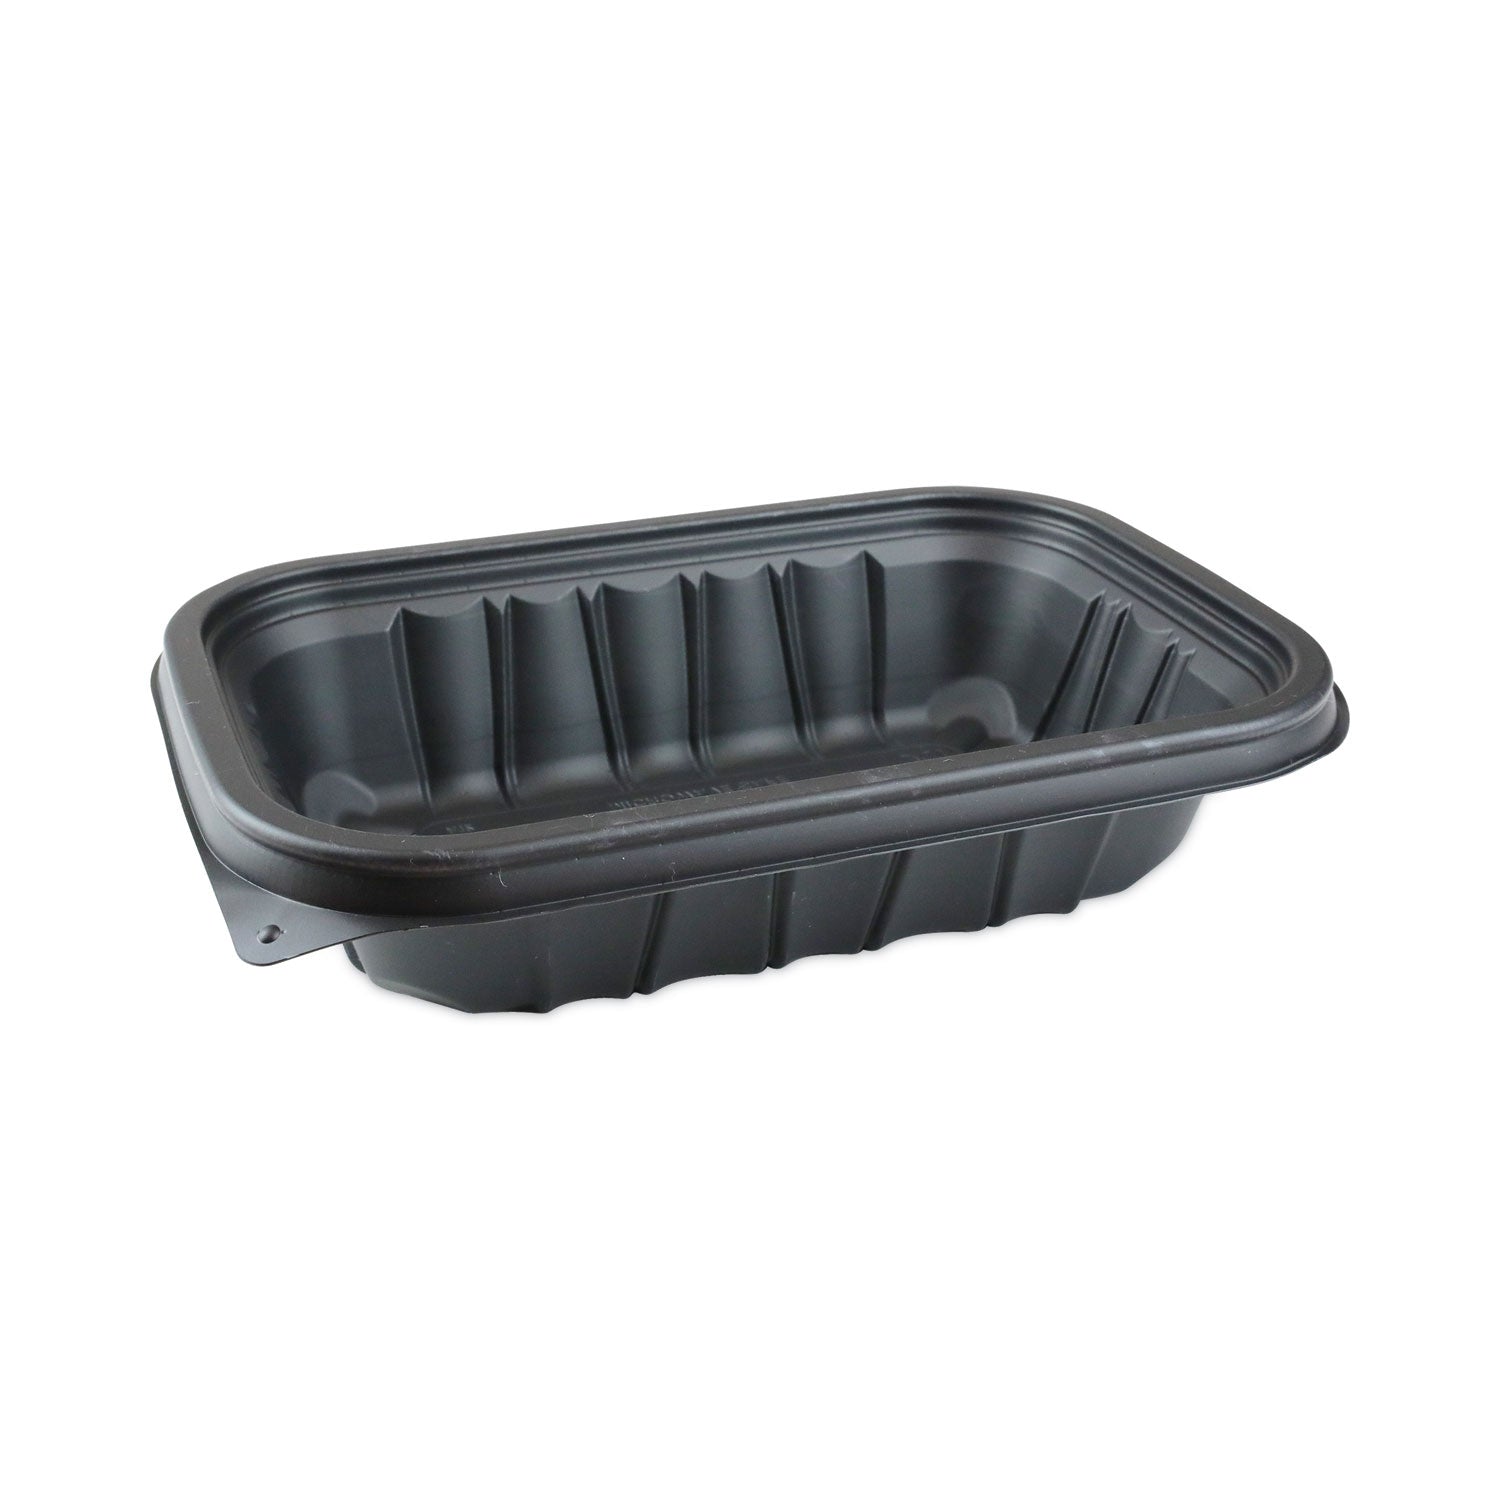 earthchoice-entree2go-takeout-container-24-oz-866-x-575-x-197-black-plastic-300-carton_pctycnb9x624000 - 1